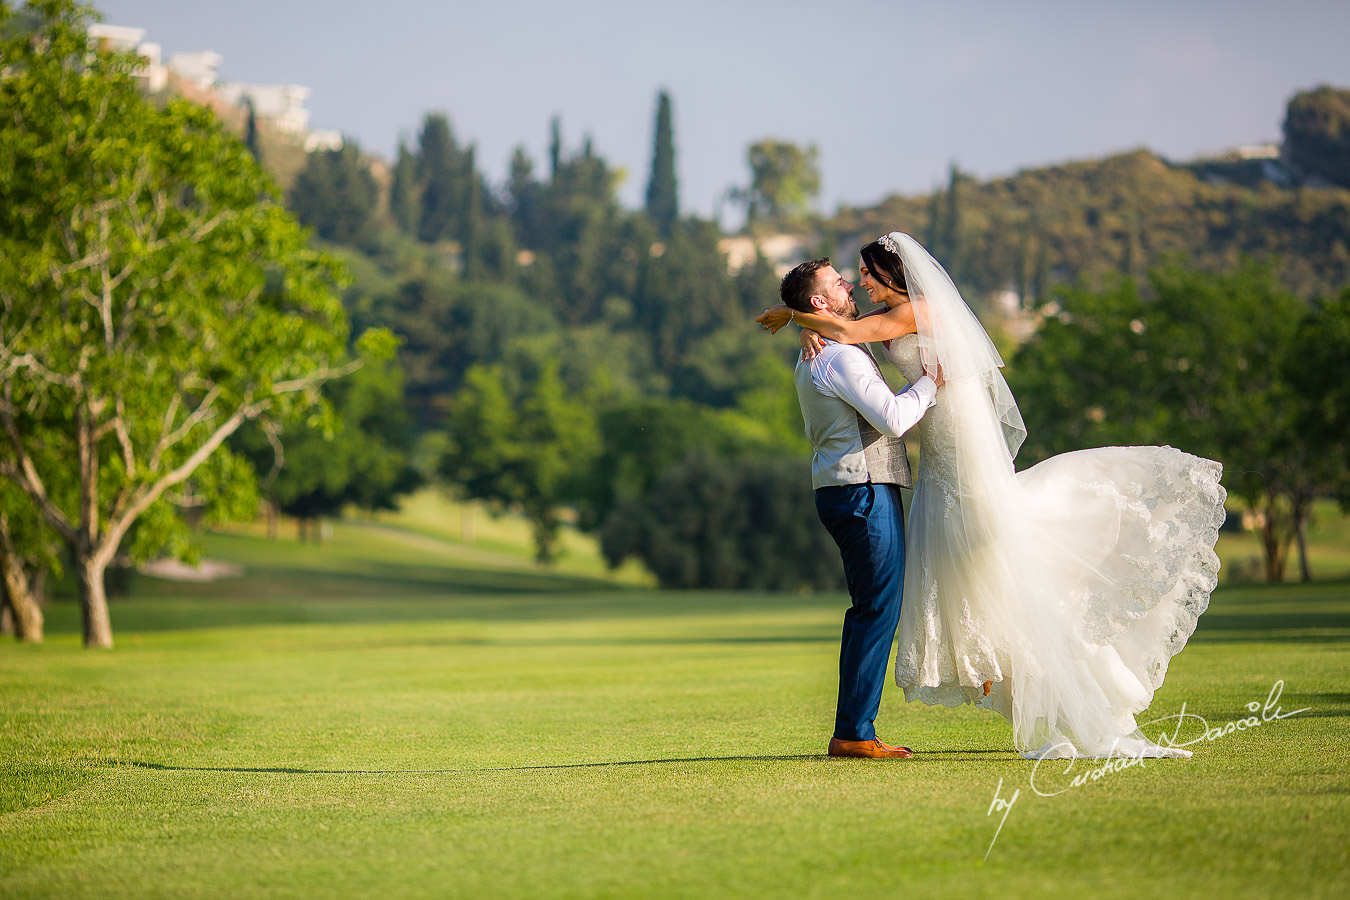 Beautiful moments captured during an Elegant Minthis Hills Wedding, in Paphos, Cyprus.